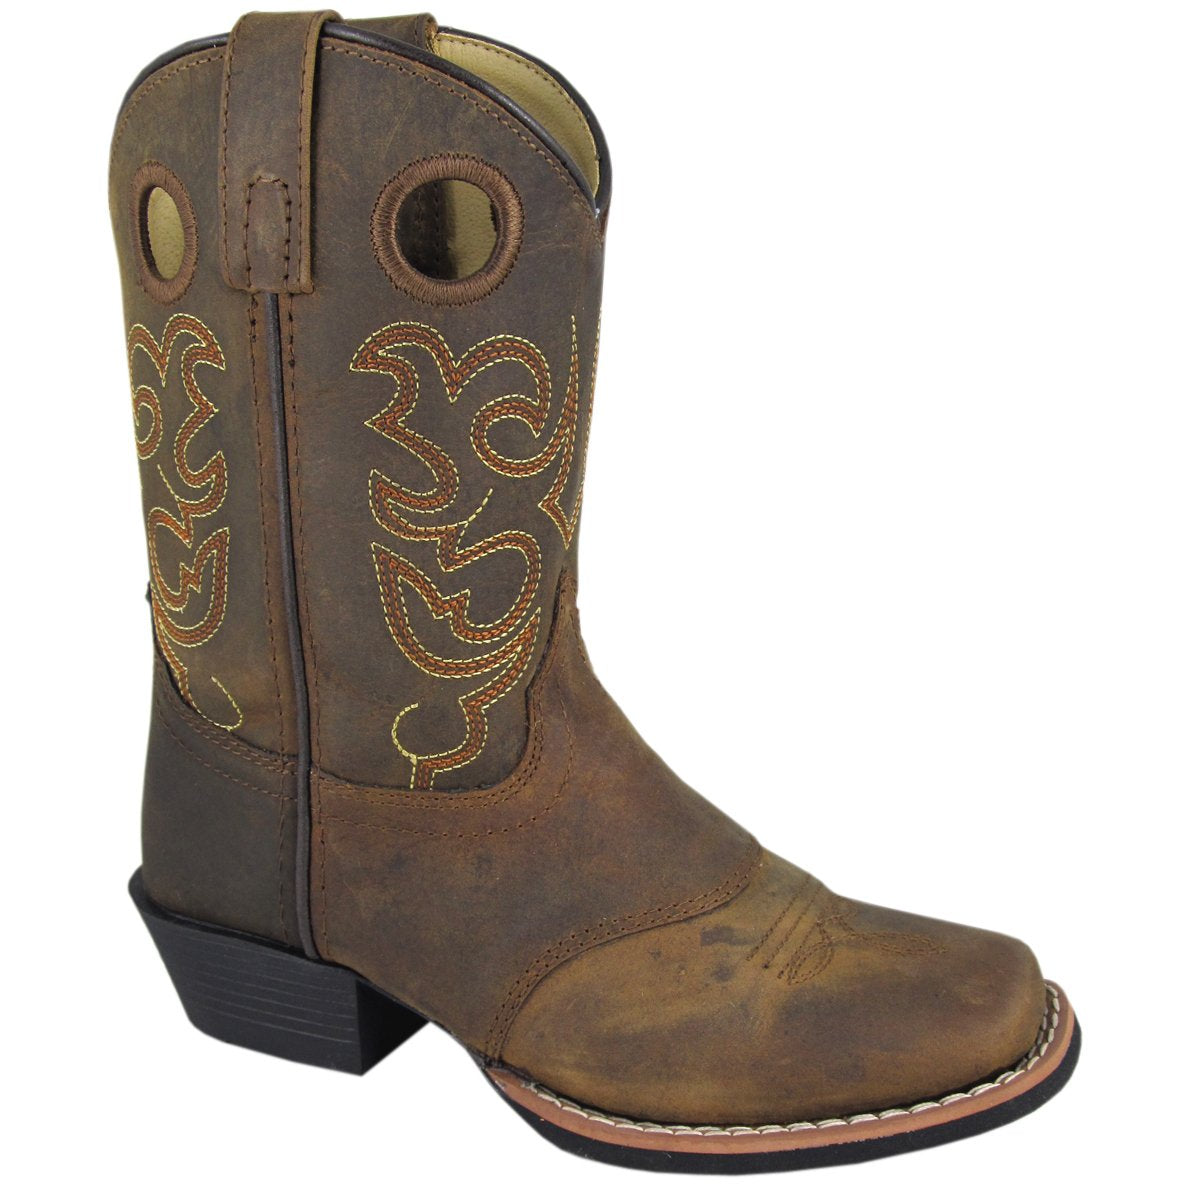 Smoky Mountain Youth Brown Distress Square Toe Boot With Saddle Vamp